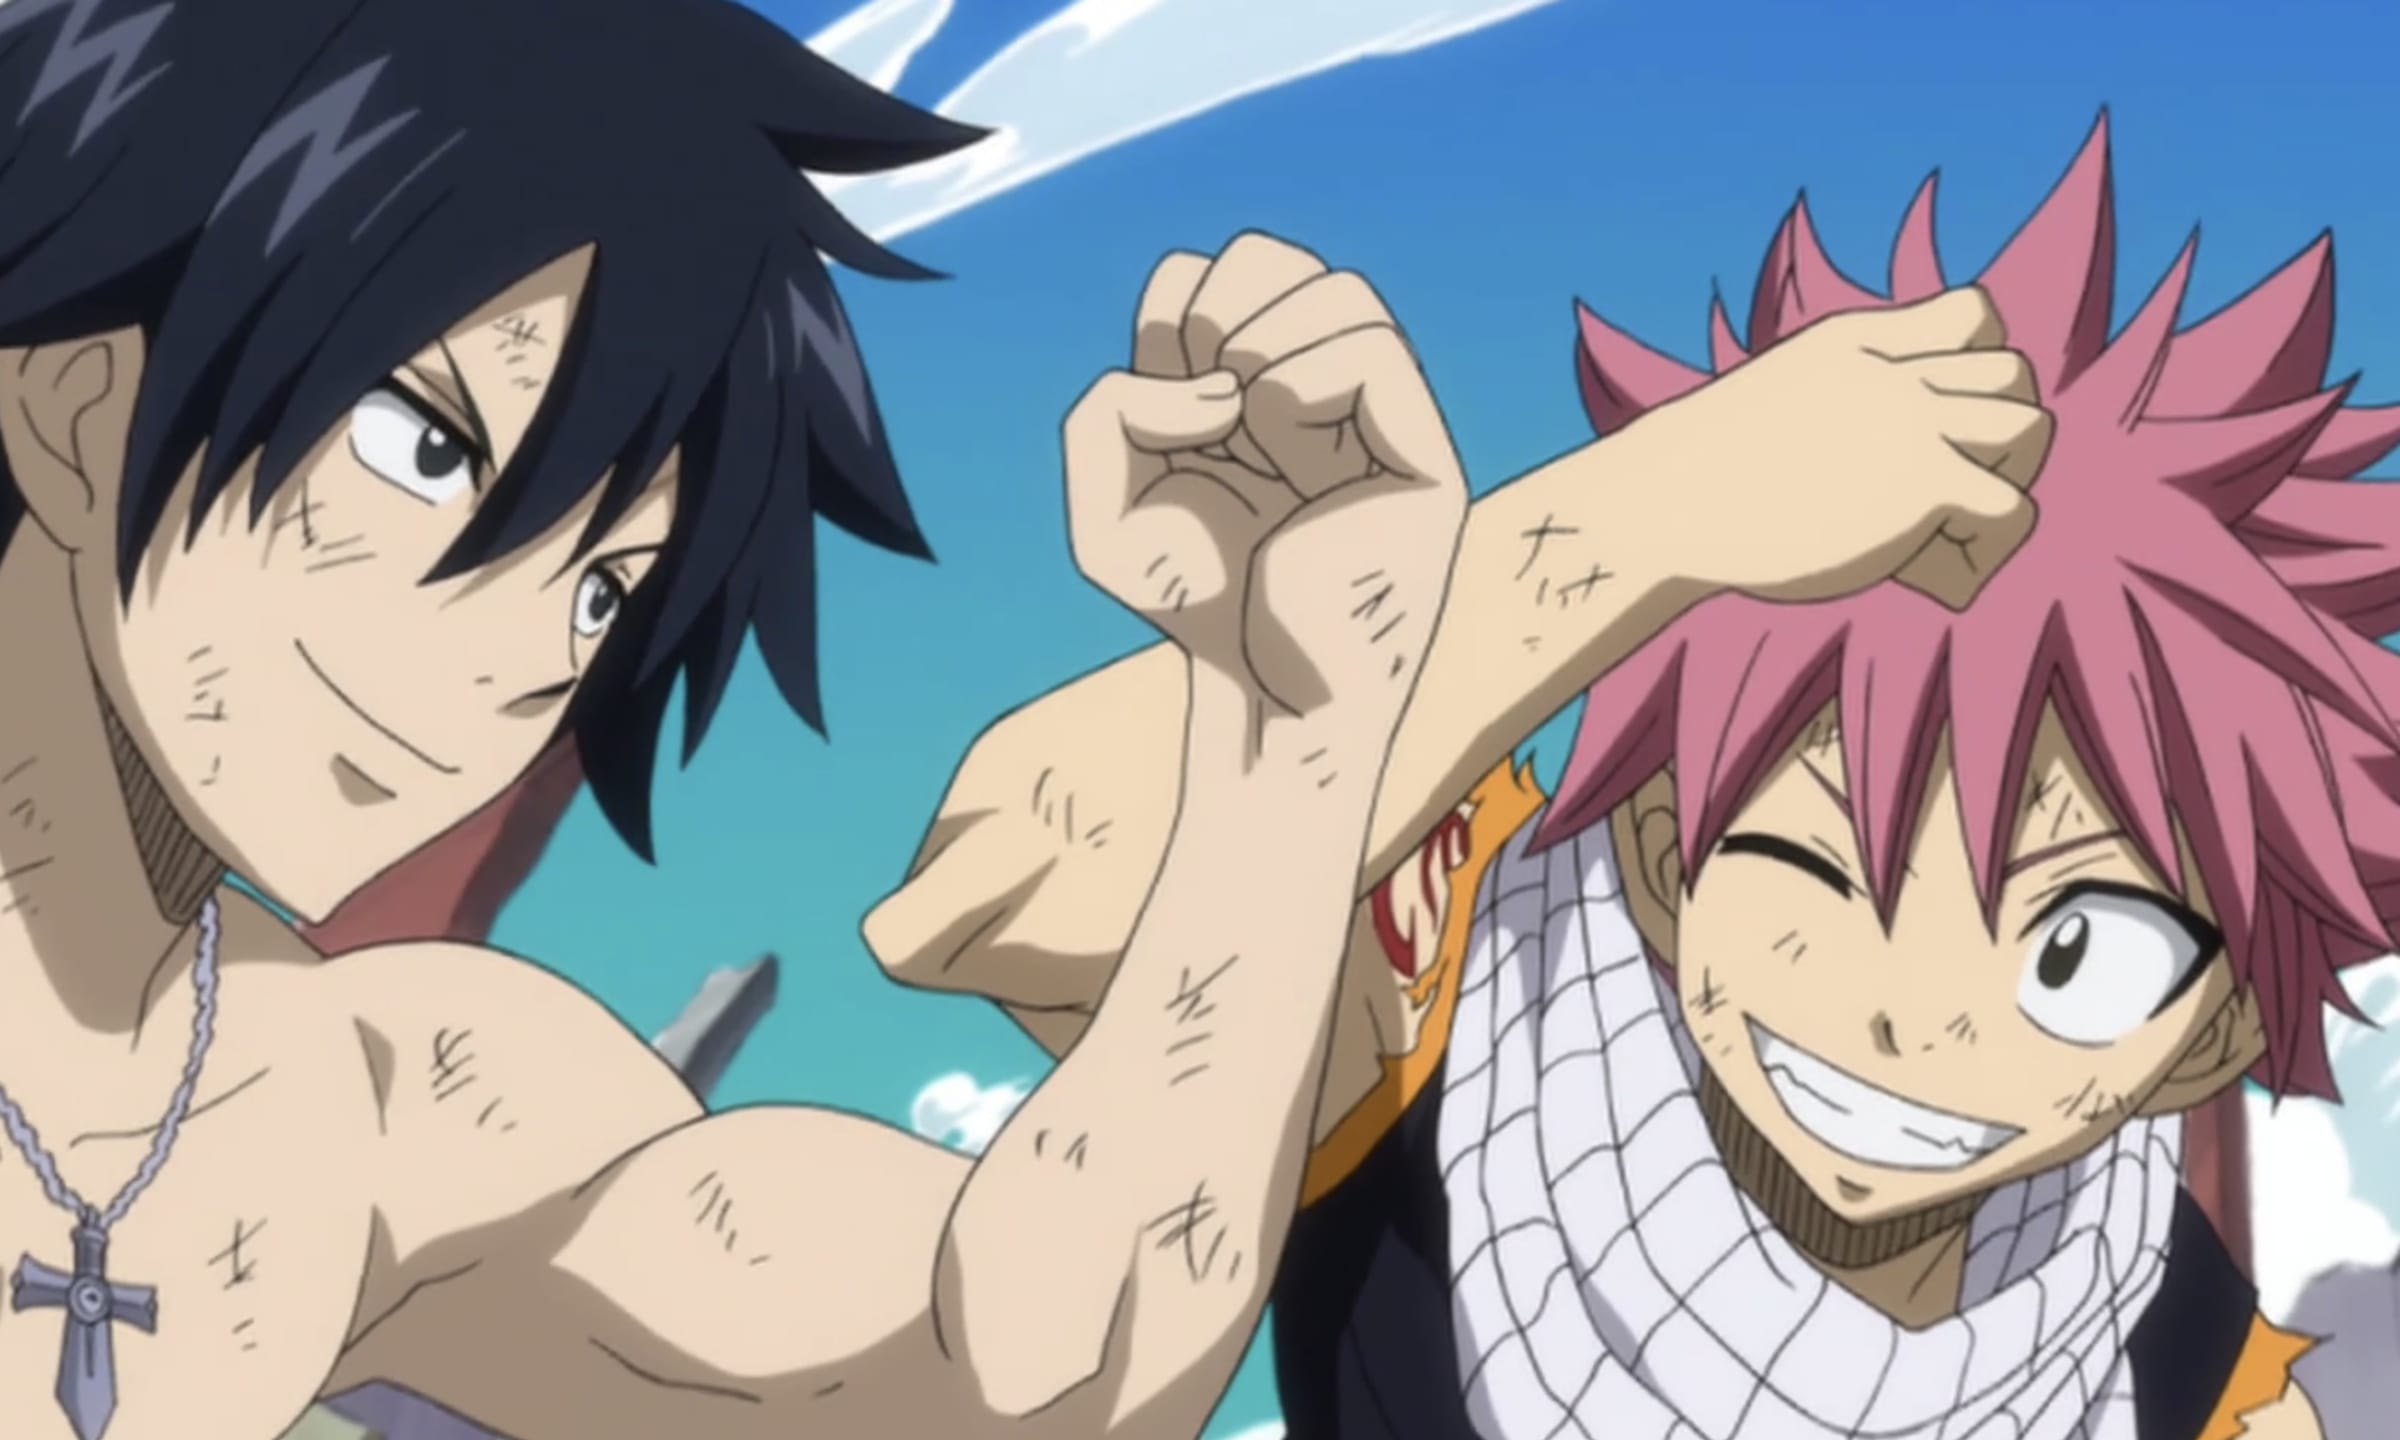 ana reith recommends gray x natsu fanfiction pic